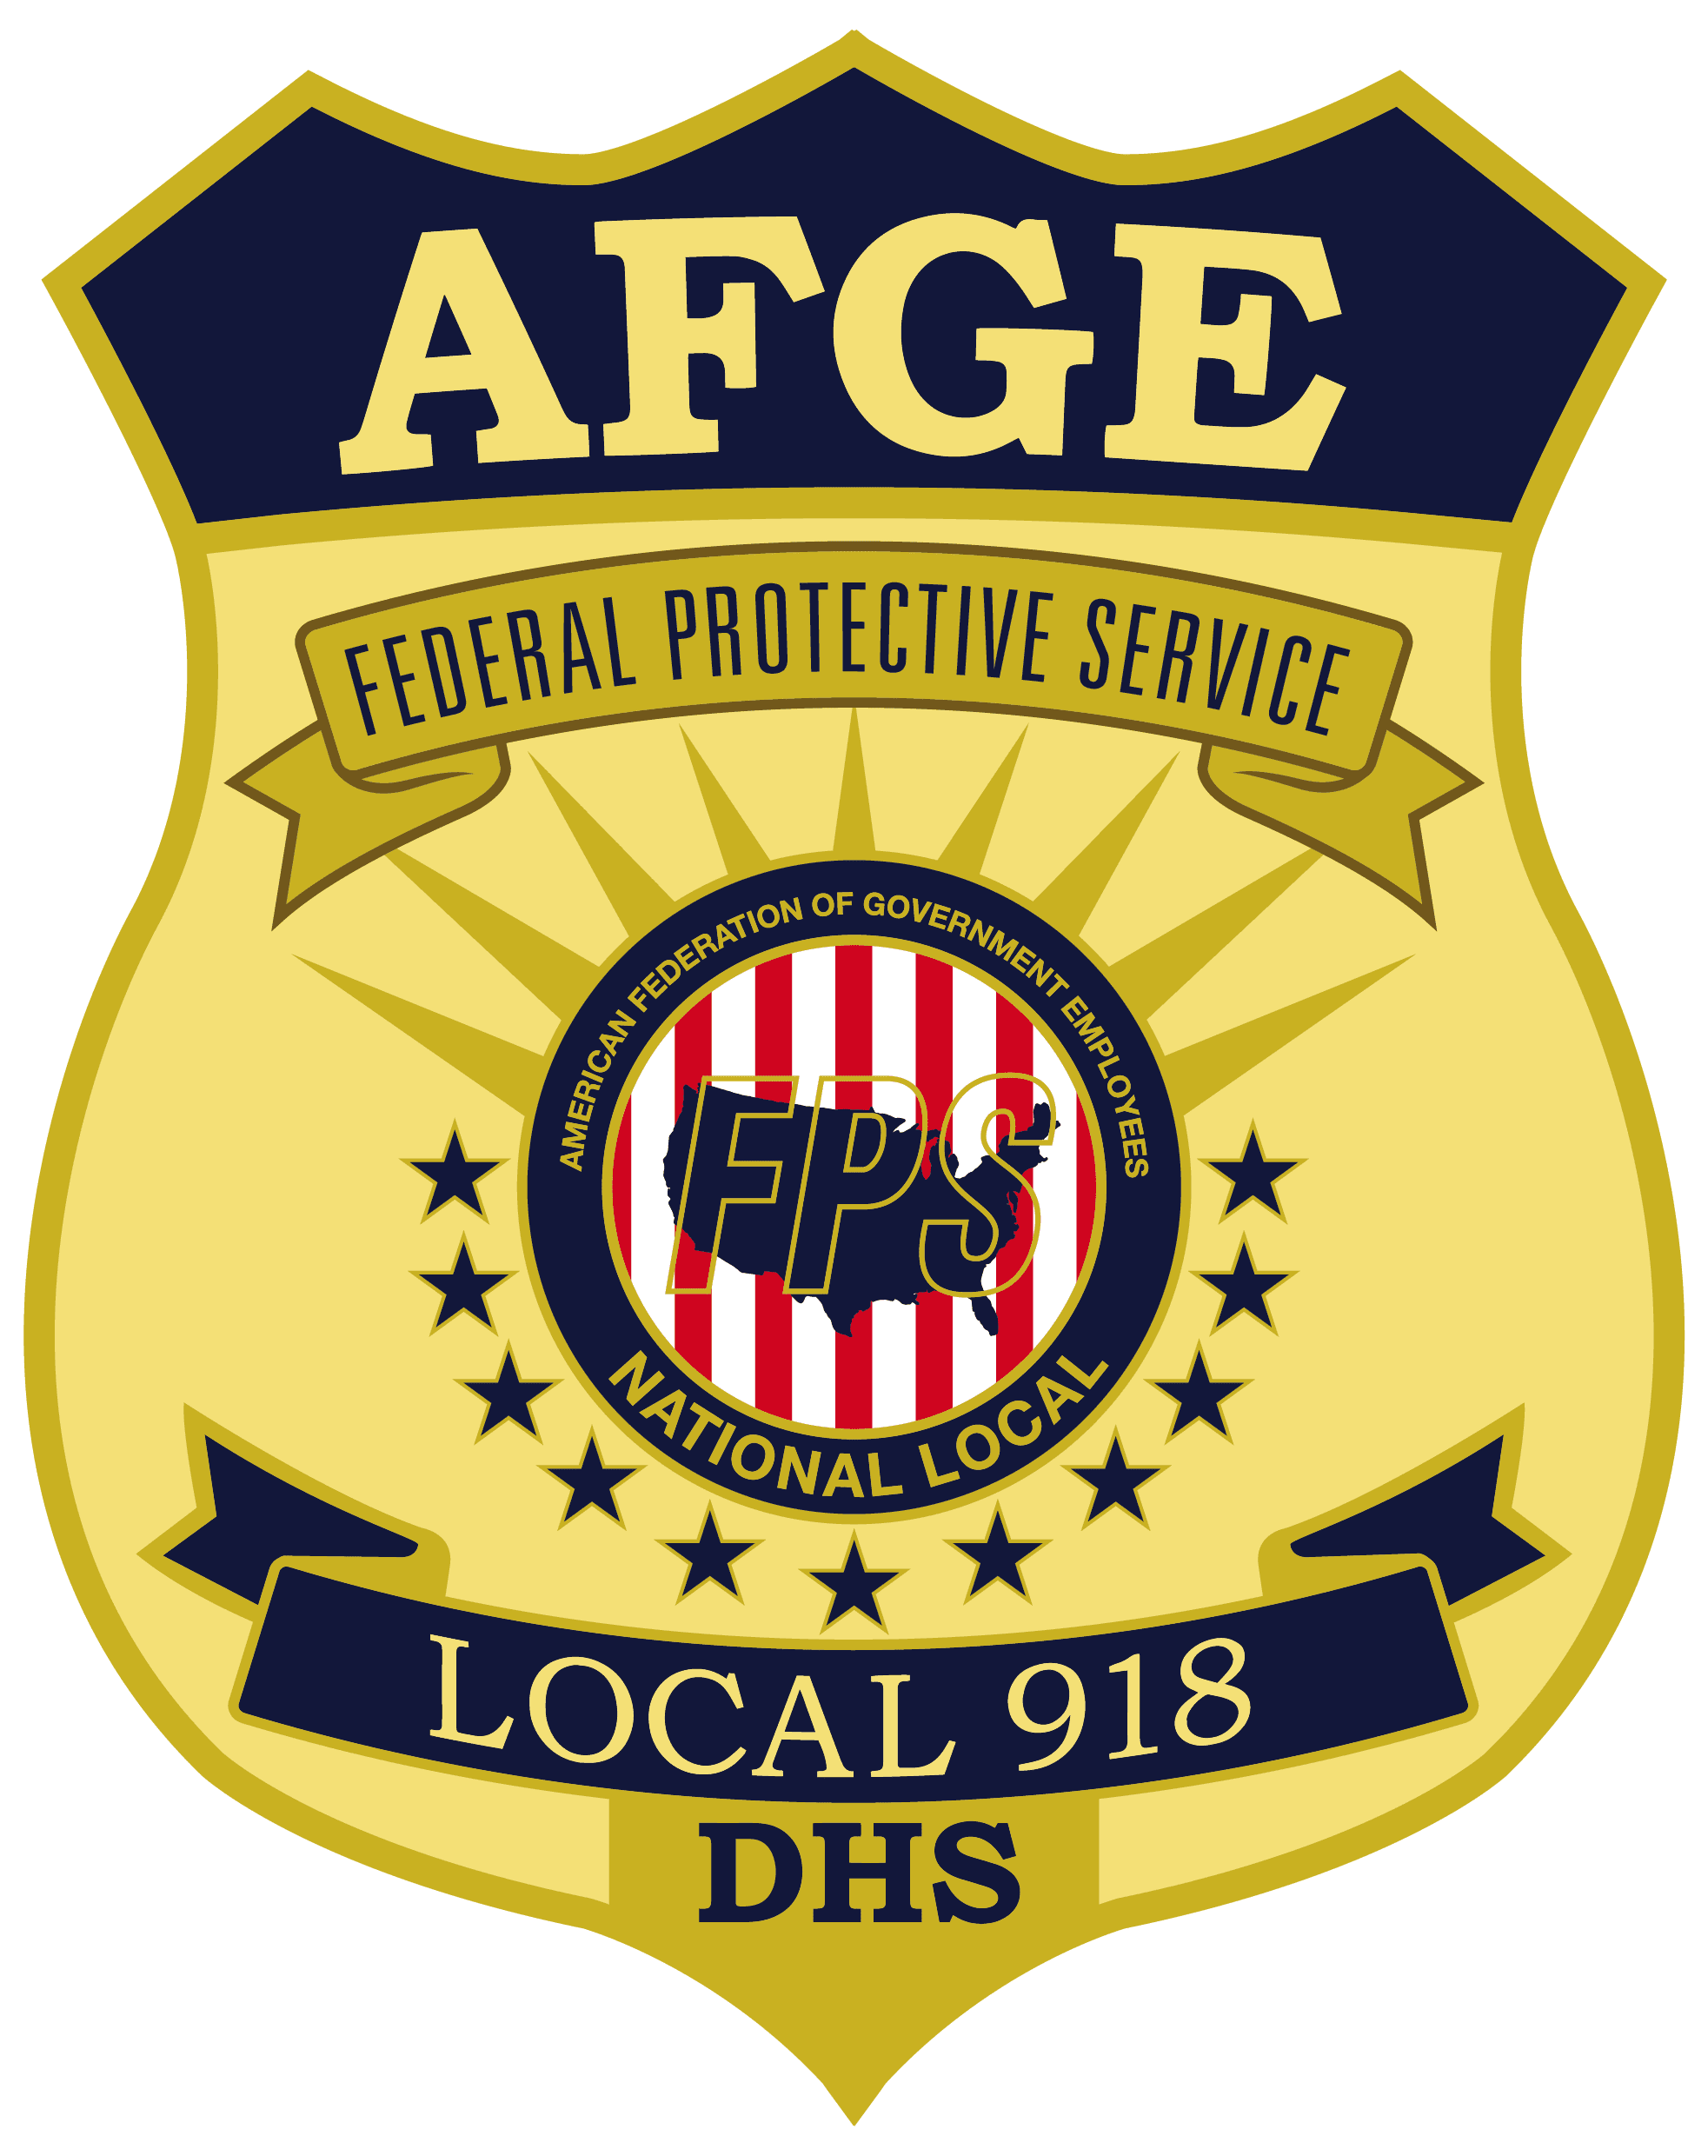 American Federation of Government Employees Local 918